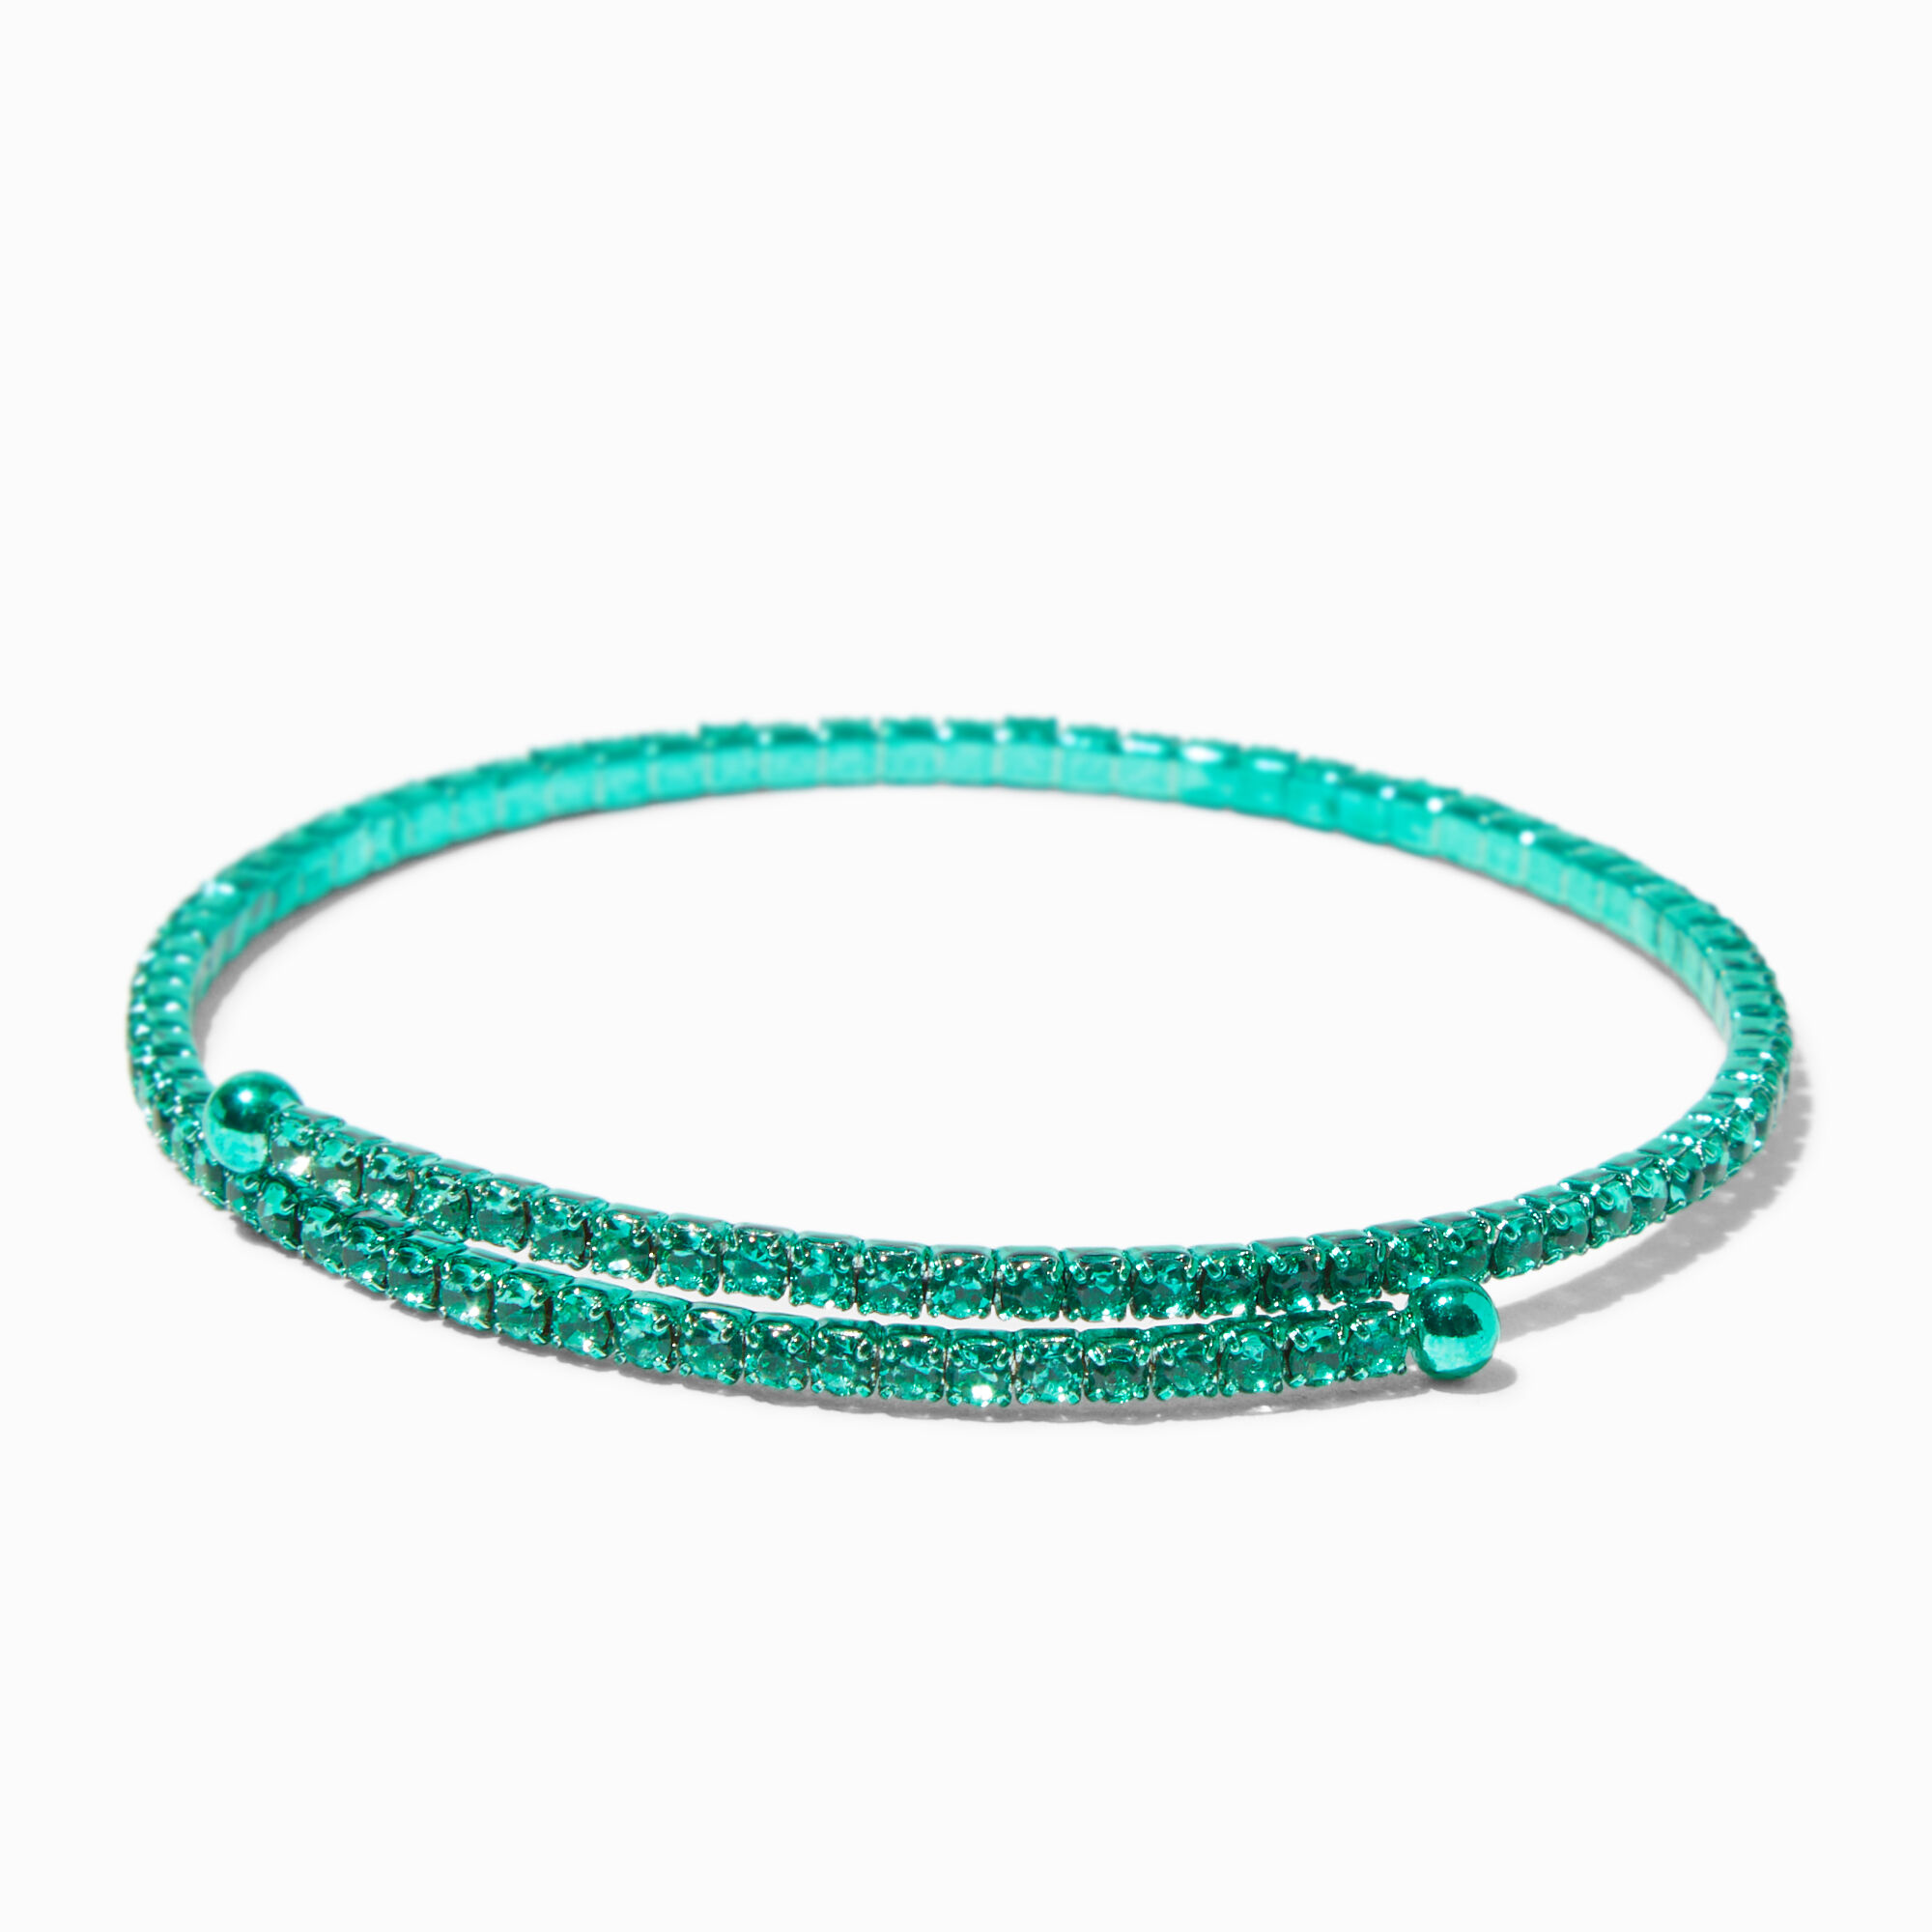 View Claires Bright Crystal Anodized Bangle Bracelet Green information